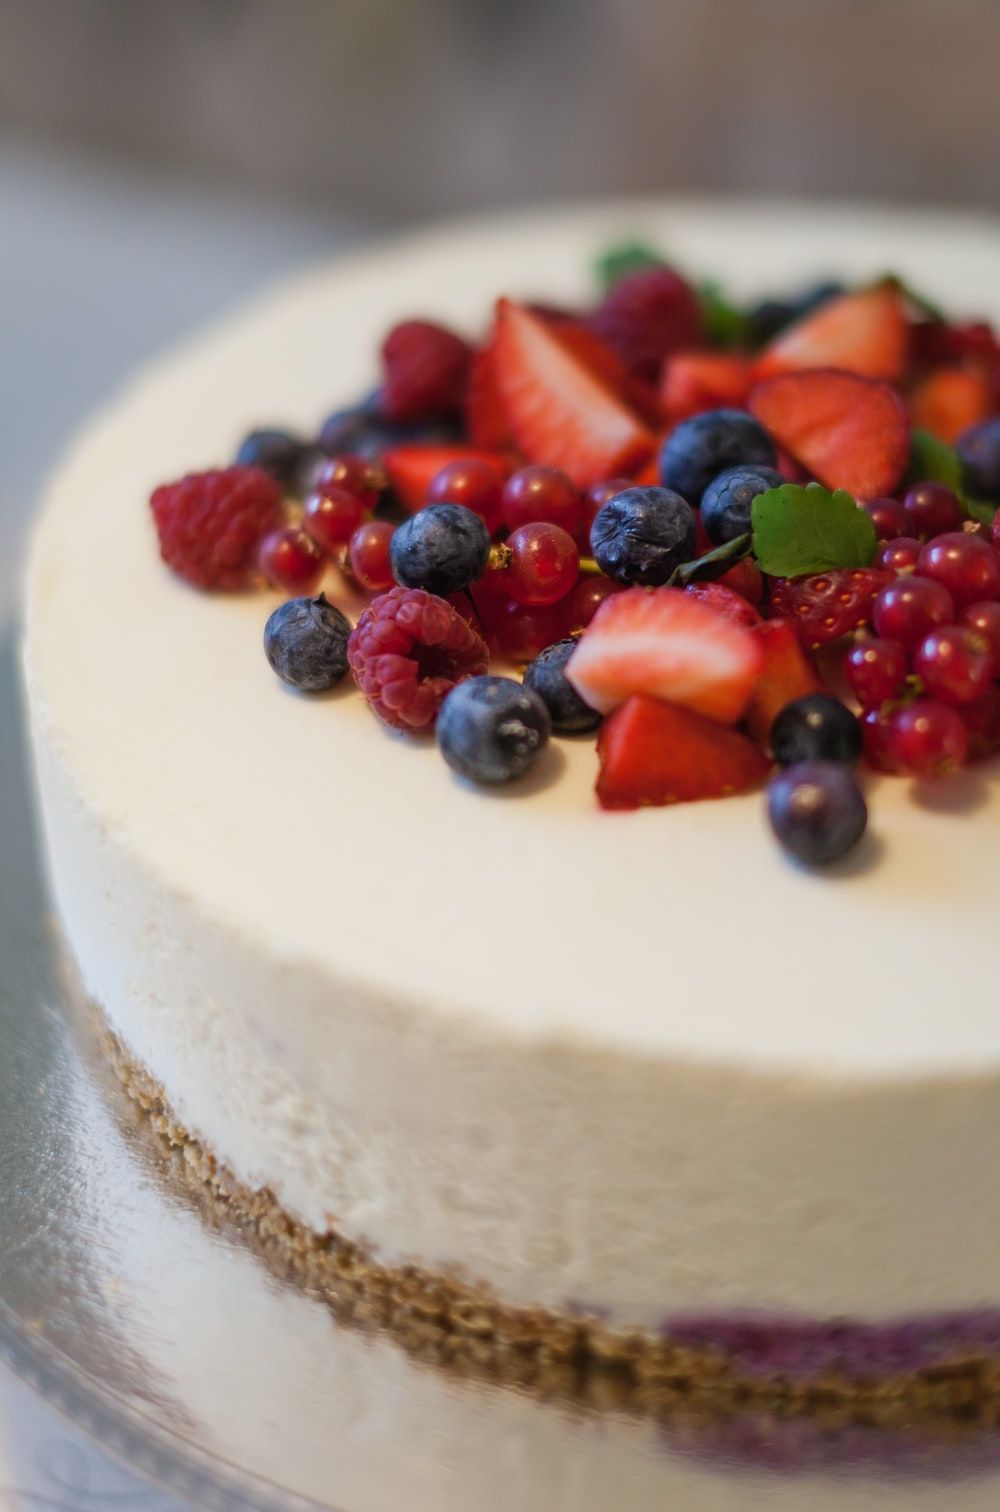 Cheese Cake Picture. Download Free Image